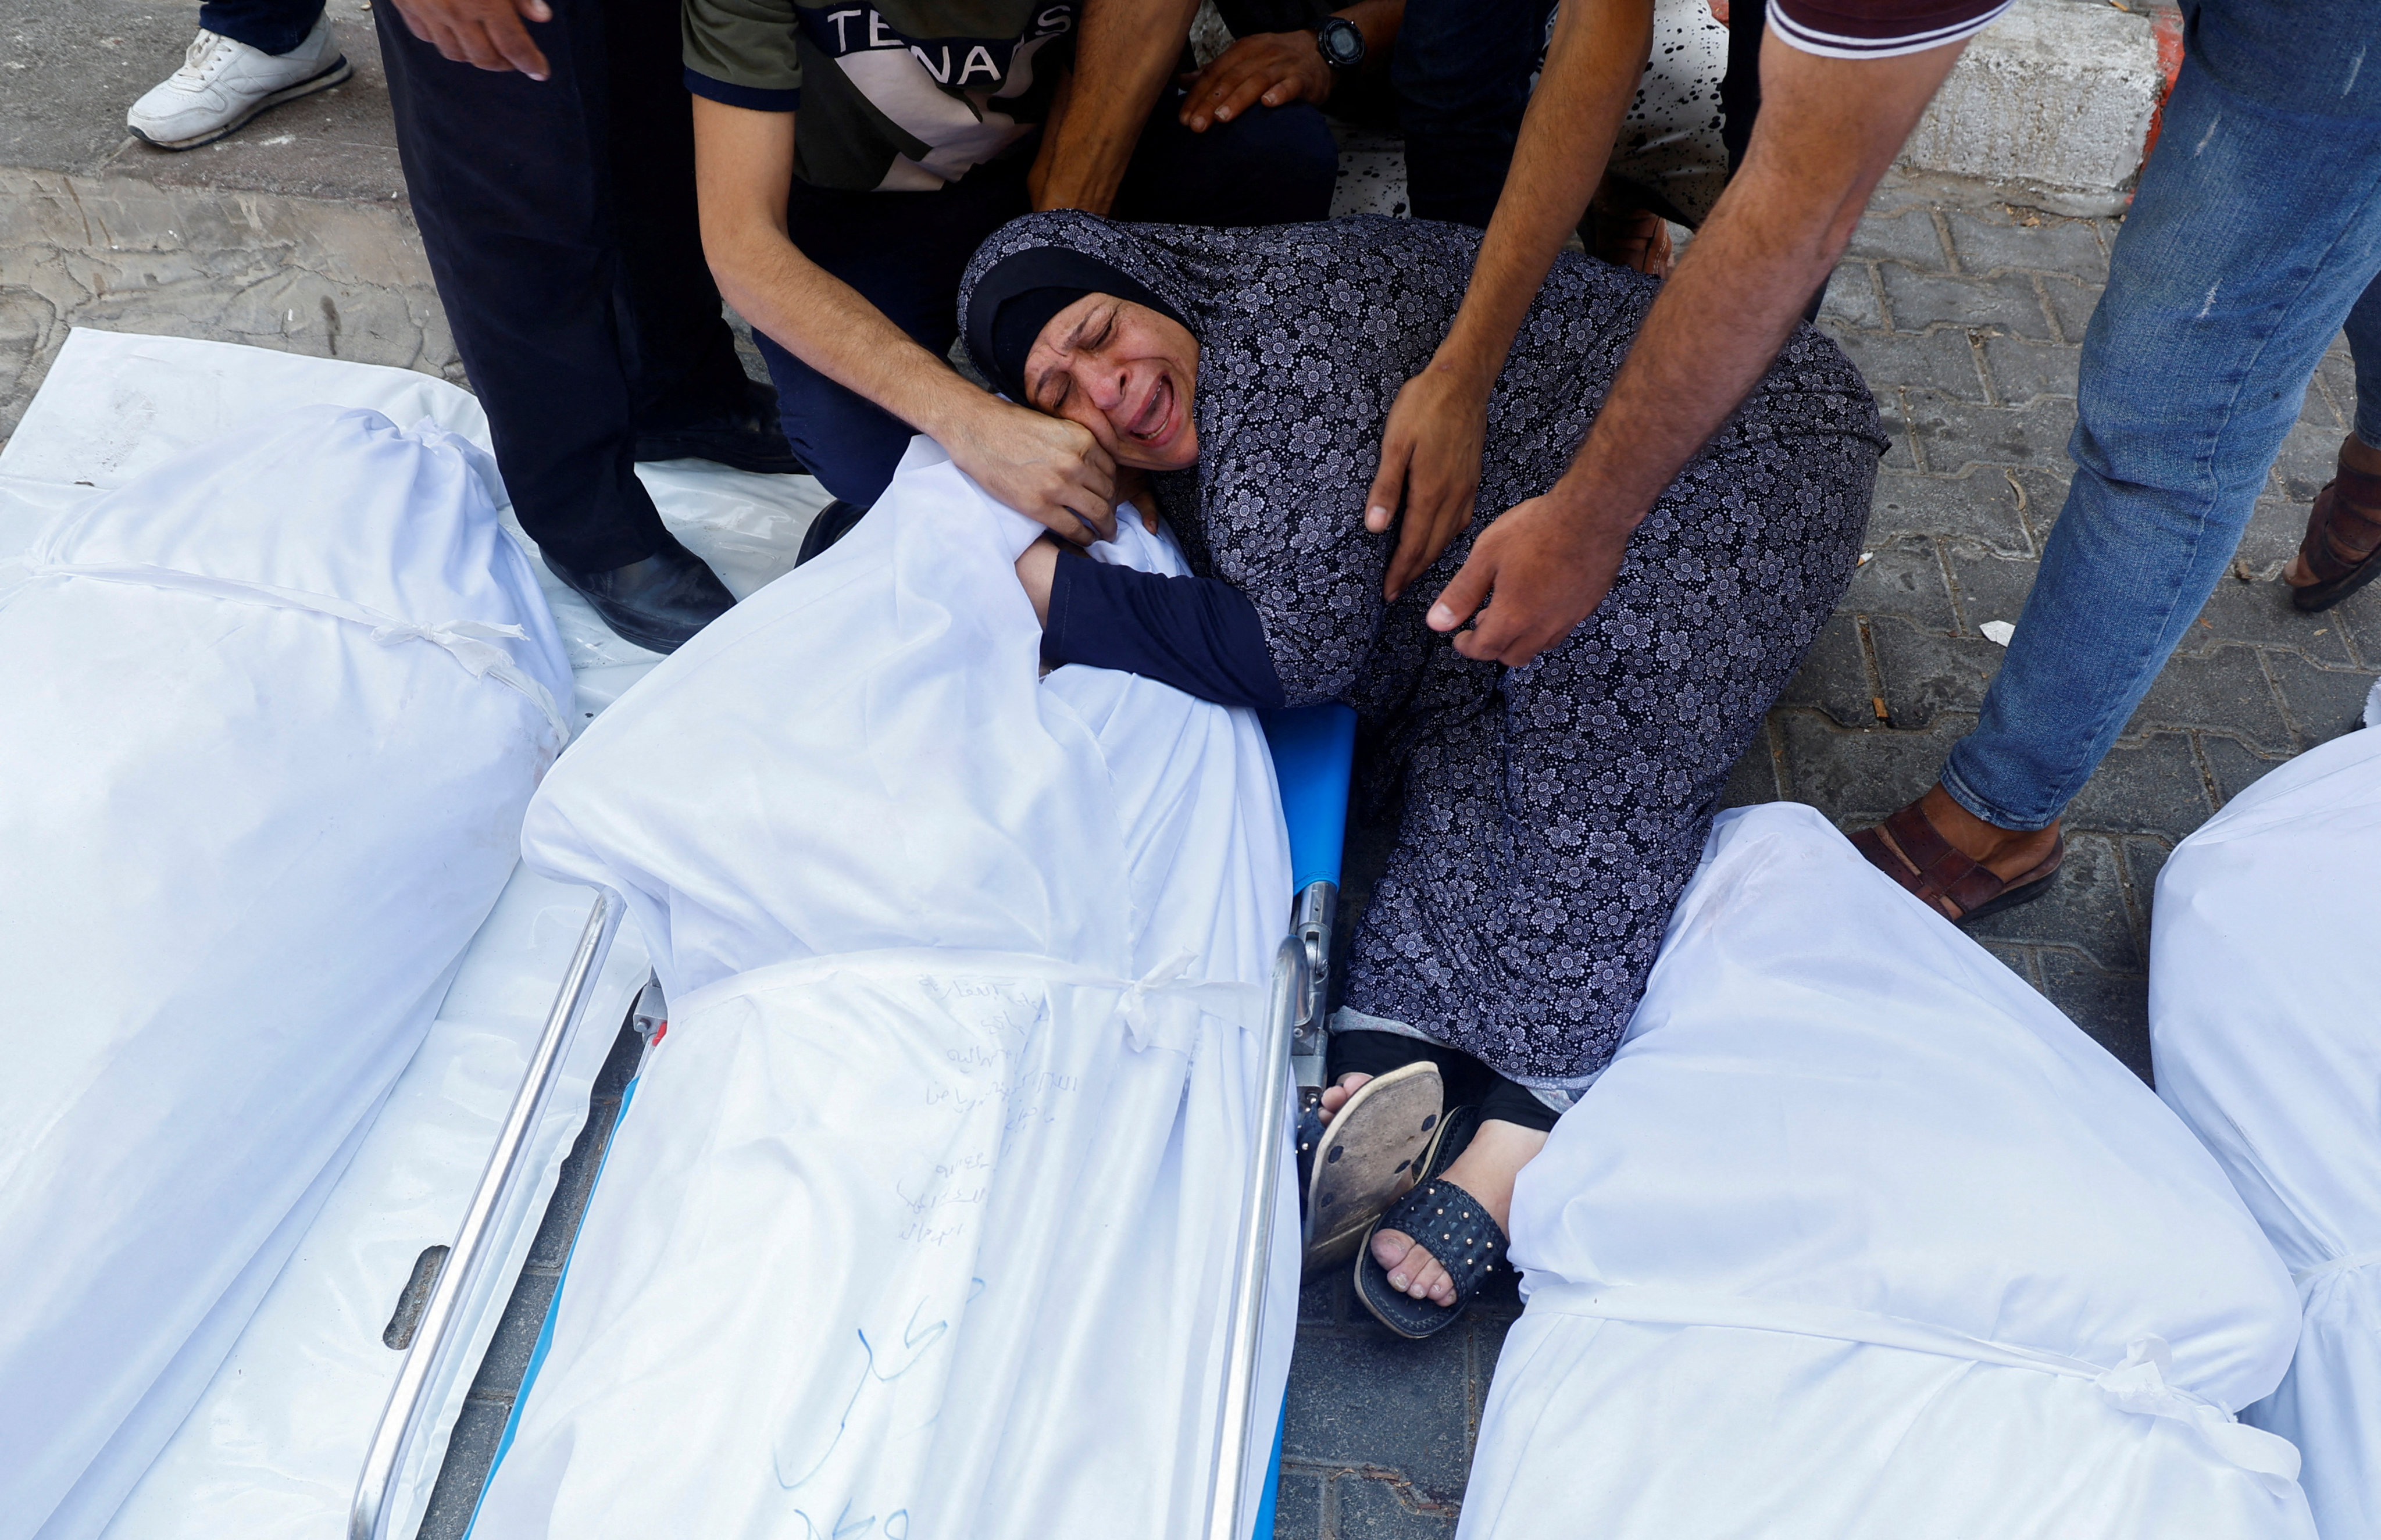 A relative reacts next to the bodies of Palestinians killed in Israeli strikes, at a hospital in Gaza City. Photo: Reuters